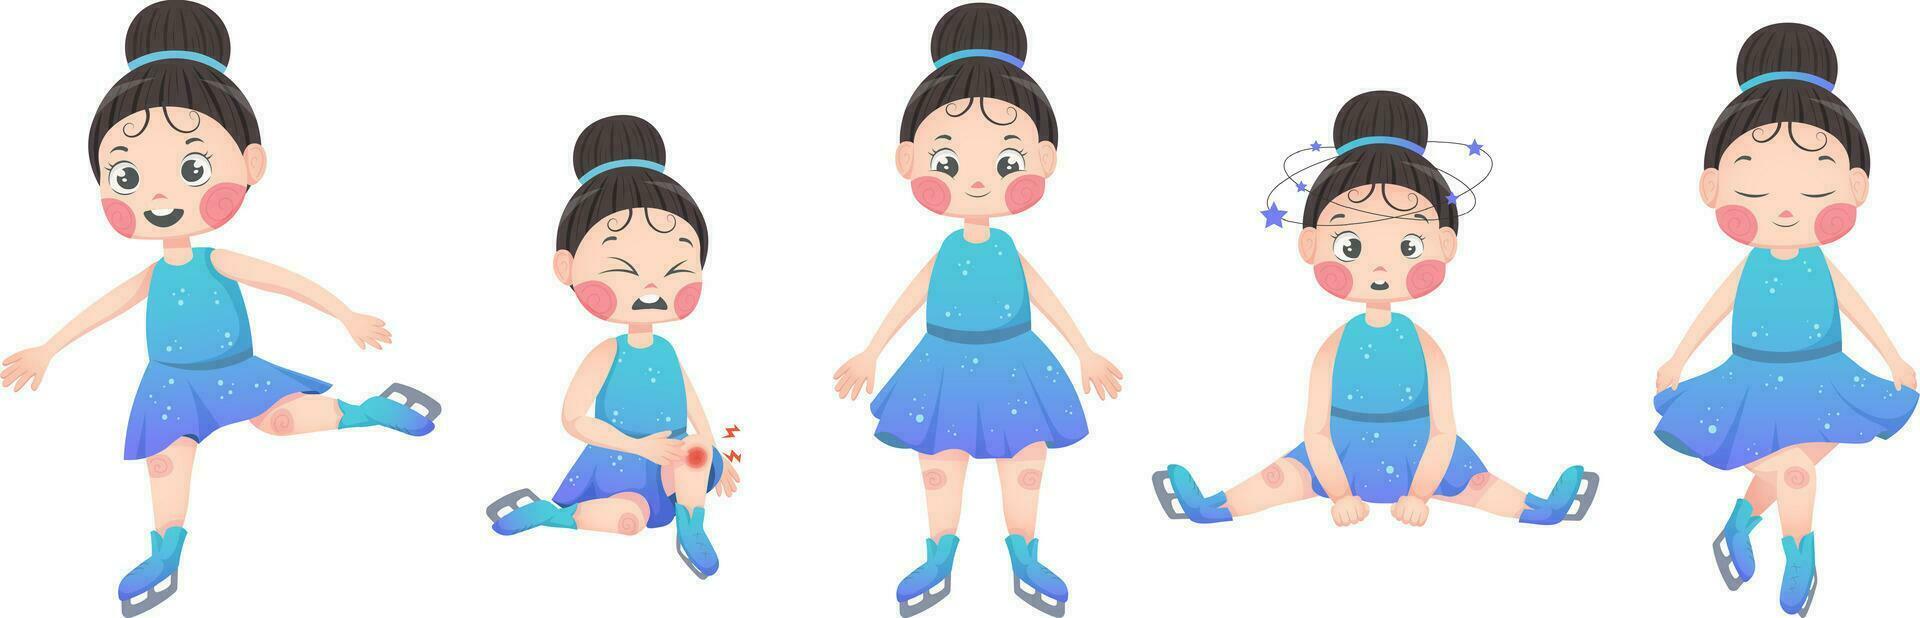 Cartoon girl figure skater in a sporty blue dress with sequins in different poses. Emotions and sensations, pain, joy, tenderness, dizziness, greeting. Vector illustration